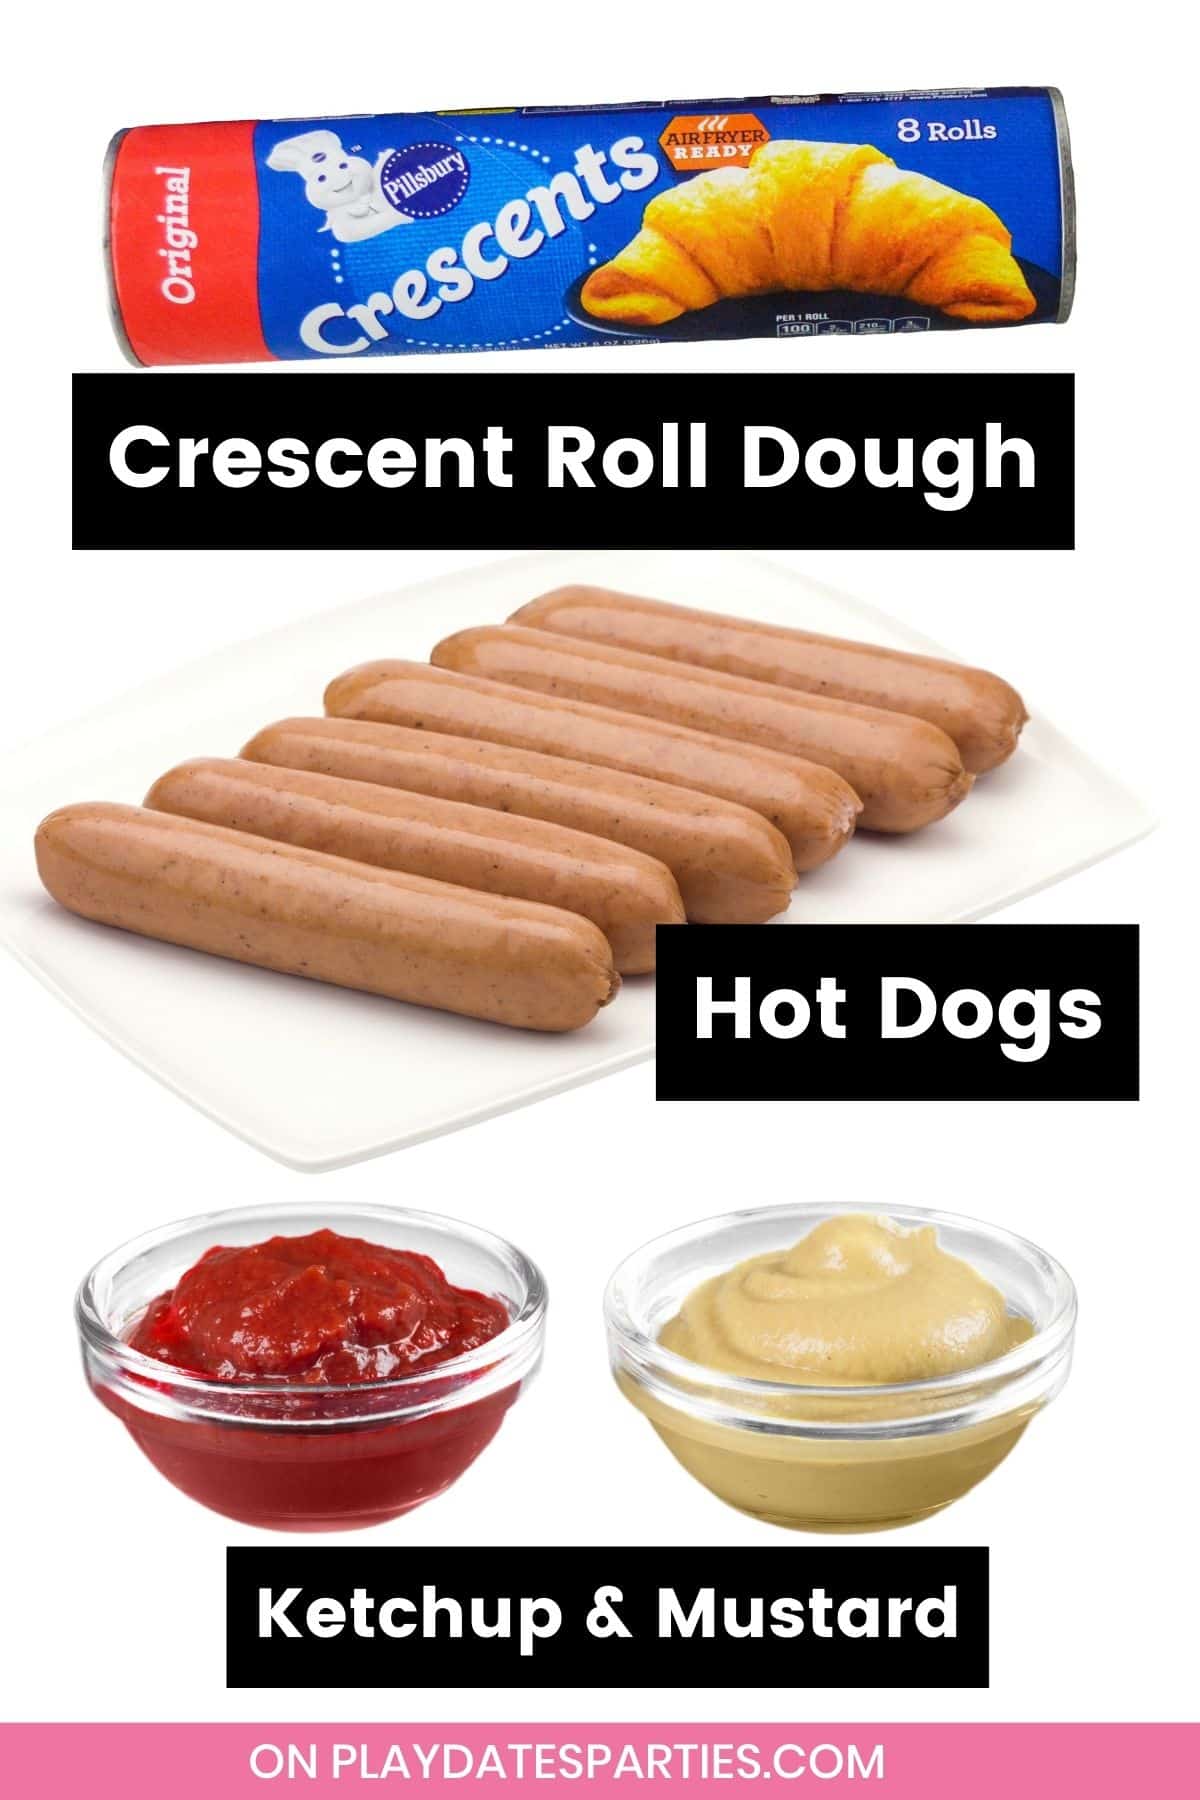 Ingredients for Mummy Dogs include crescent roll dough, hot dogs, and ketchup or mustard.